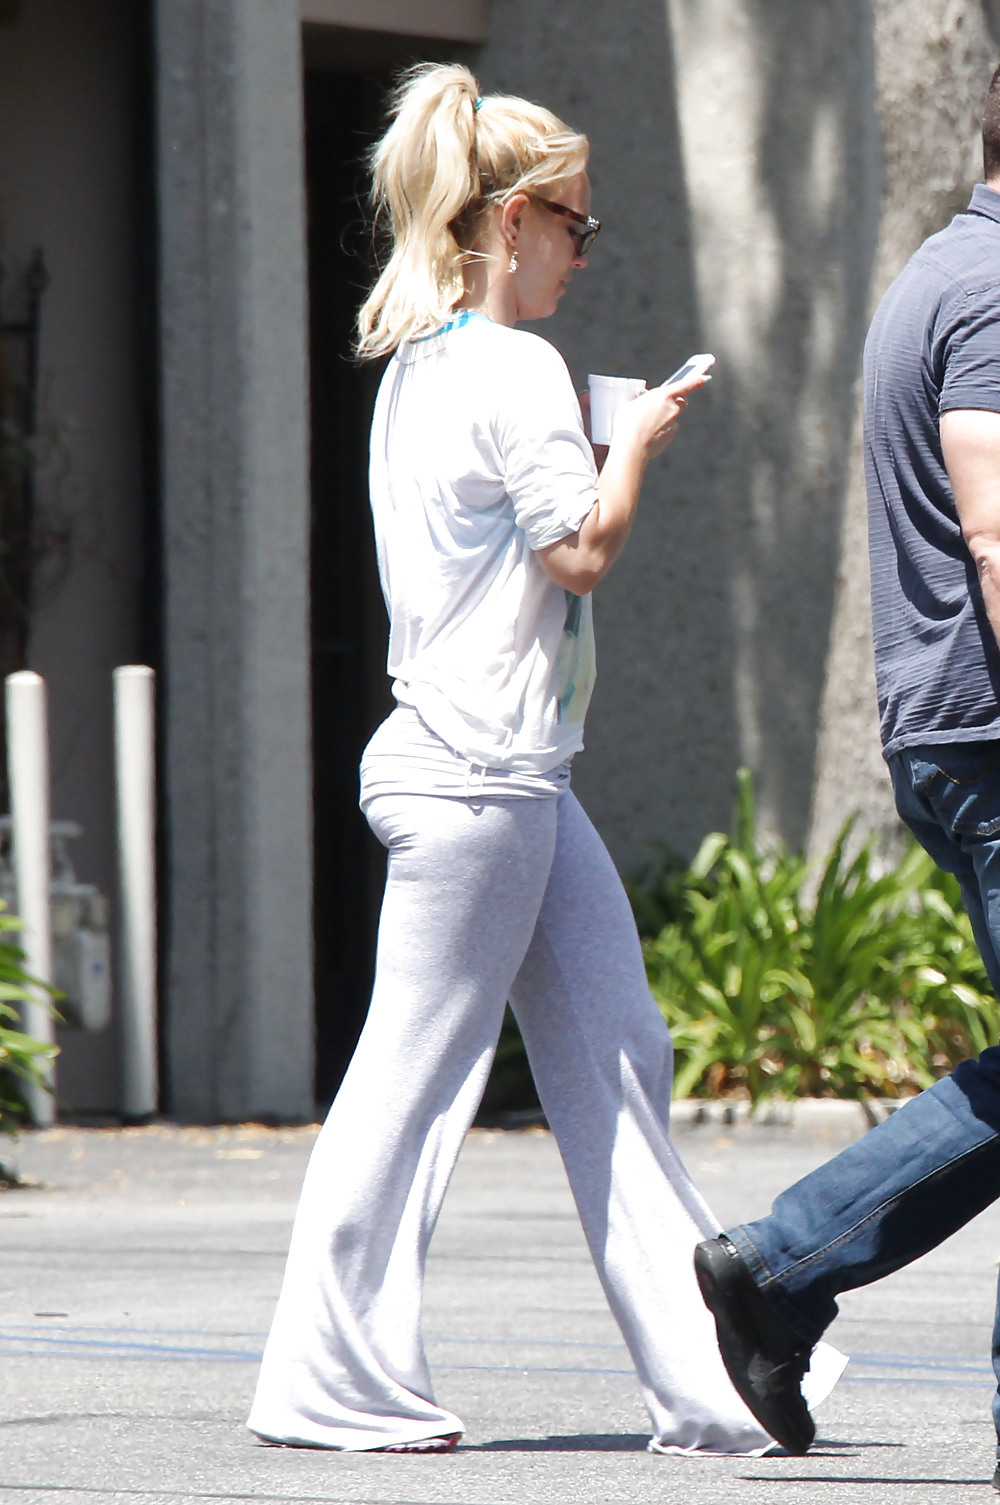 Britney spears - has a serious badonkadonk
 #16355064